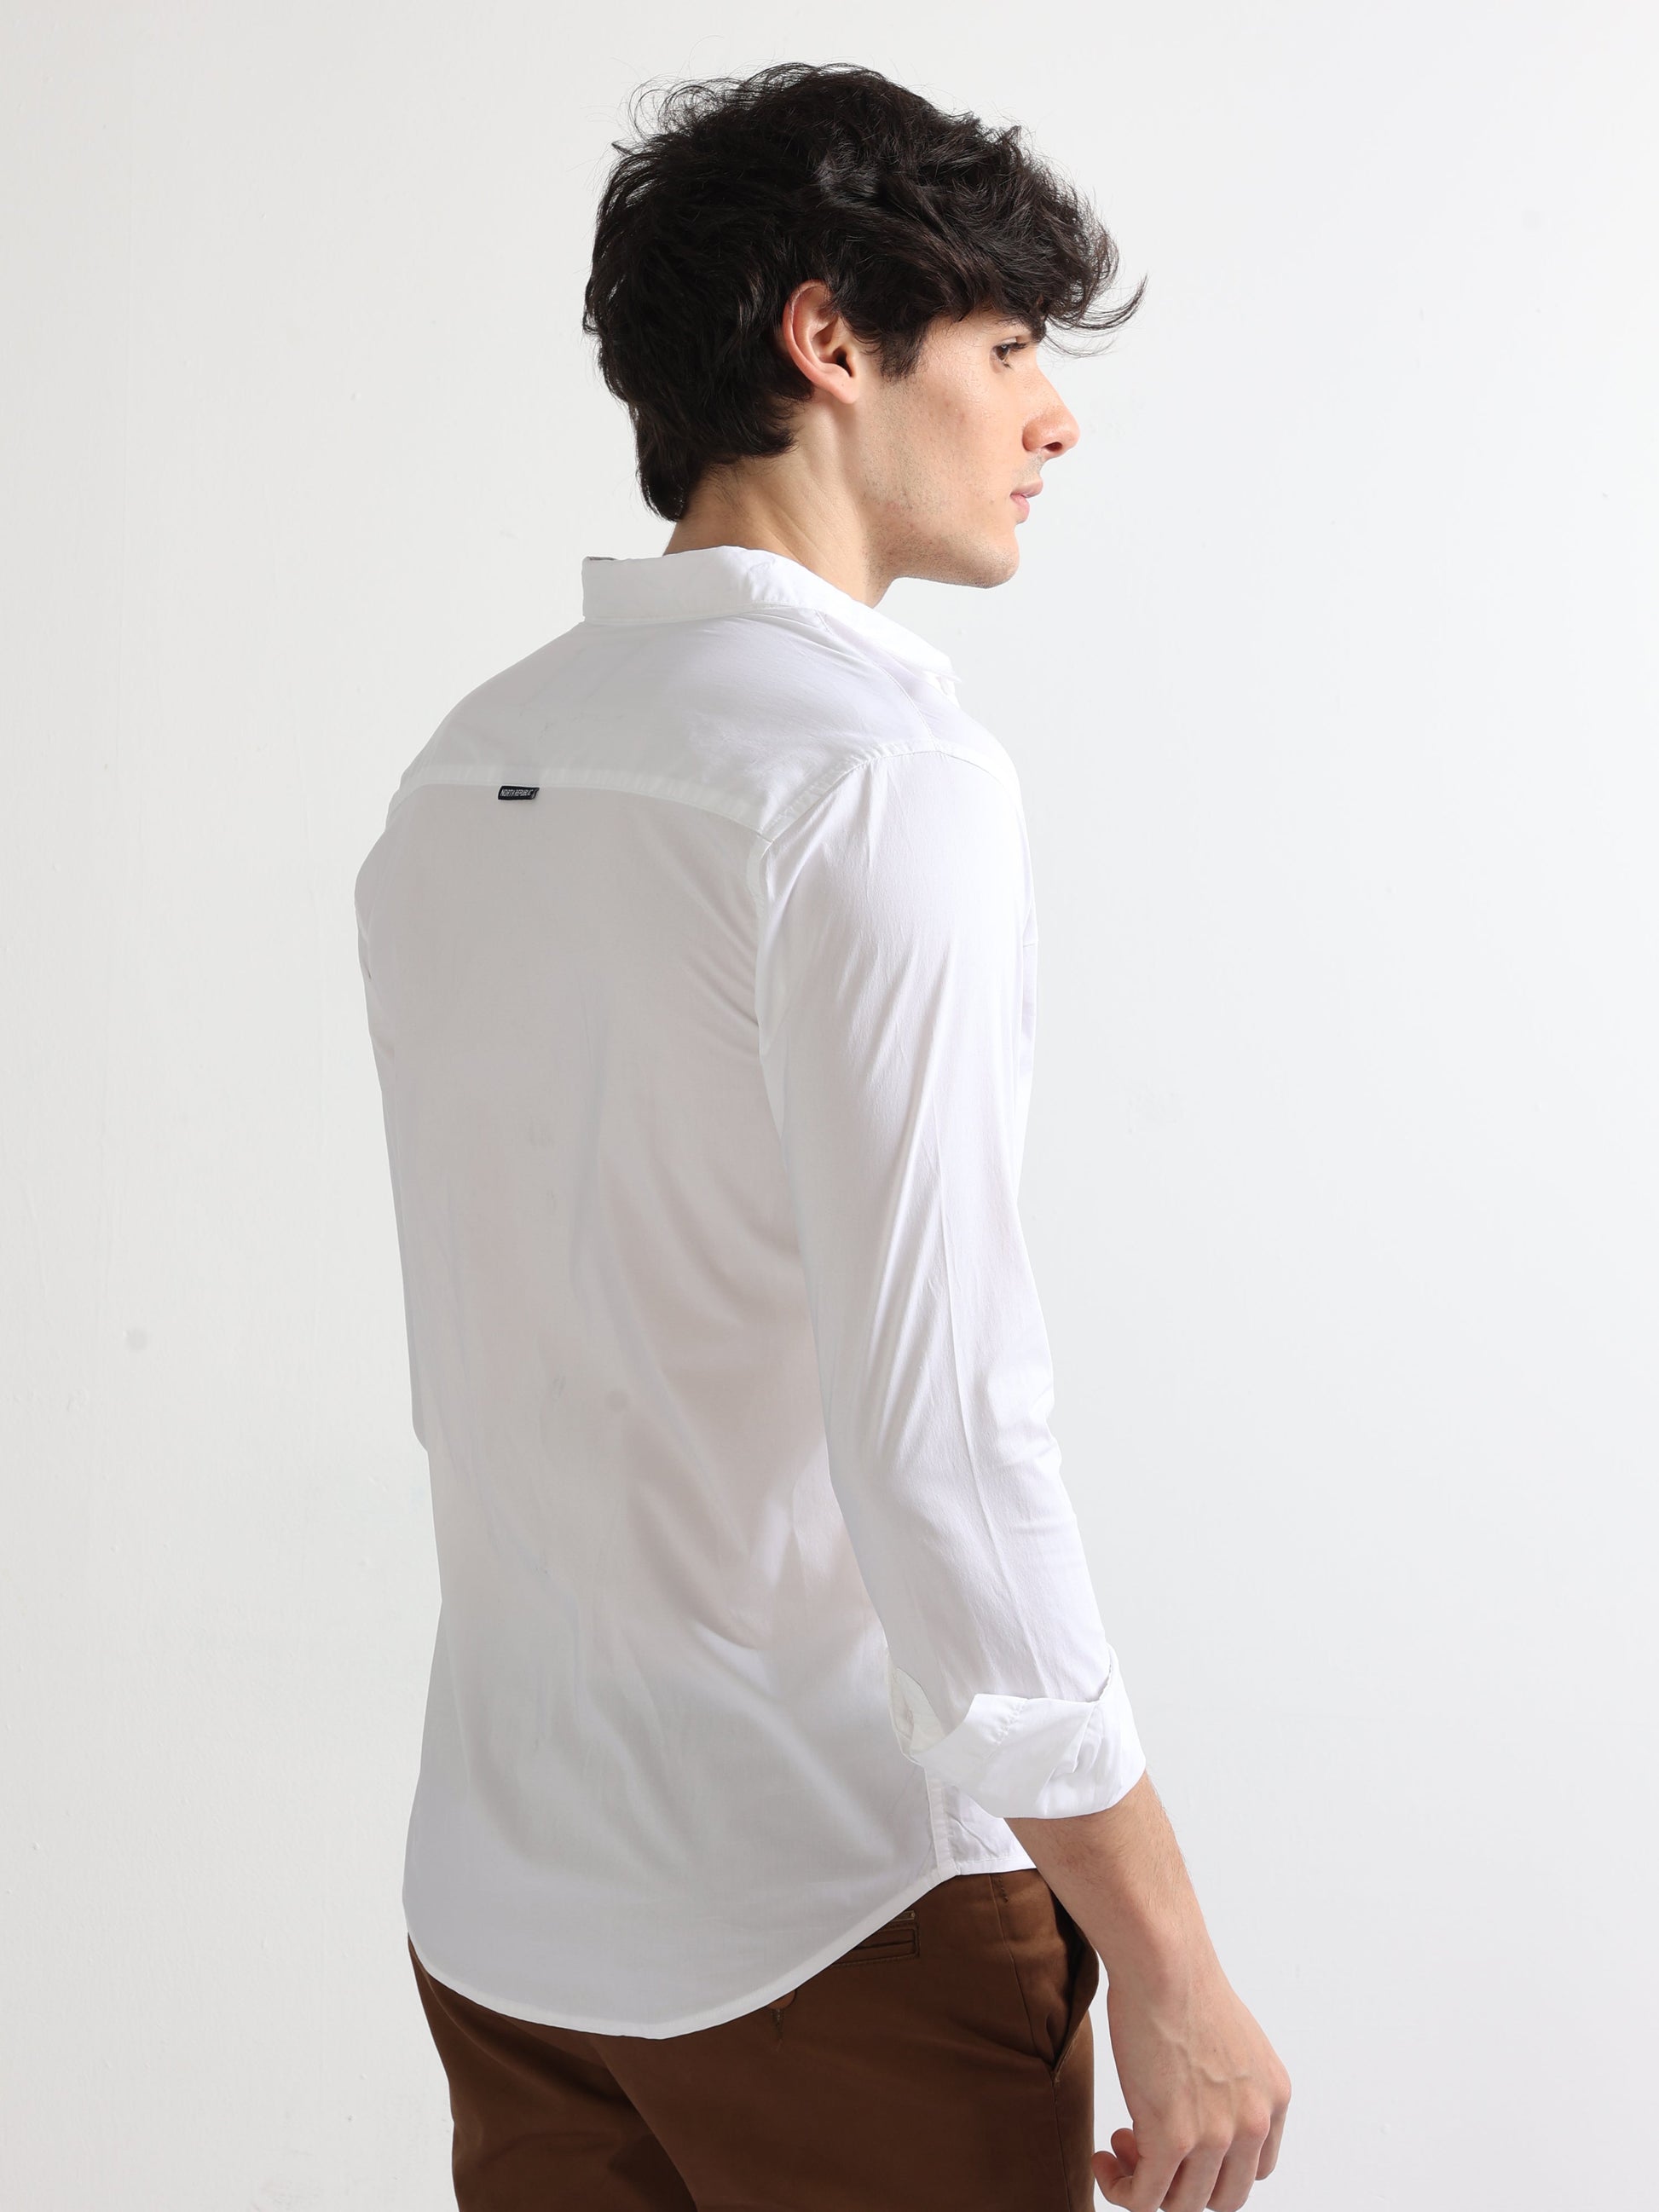 Buy Time Less Side Panel With Stylish Pocket Mens Shirt Online.